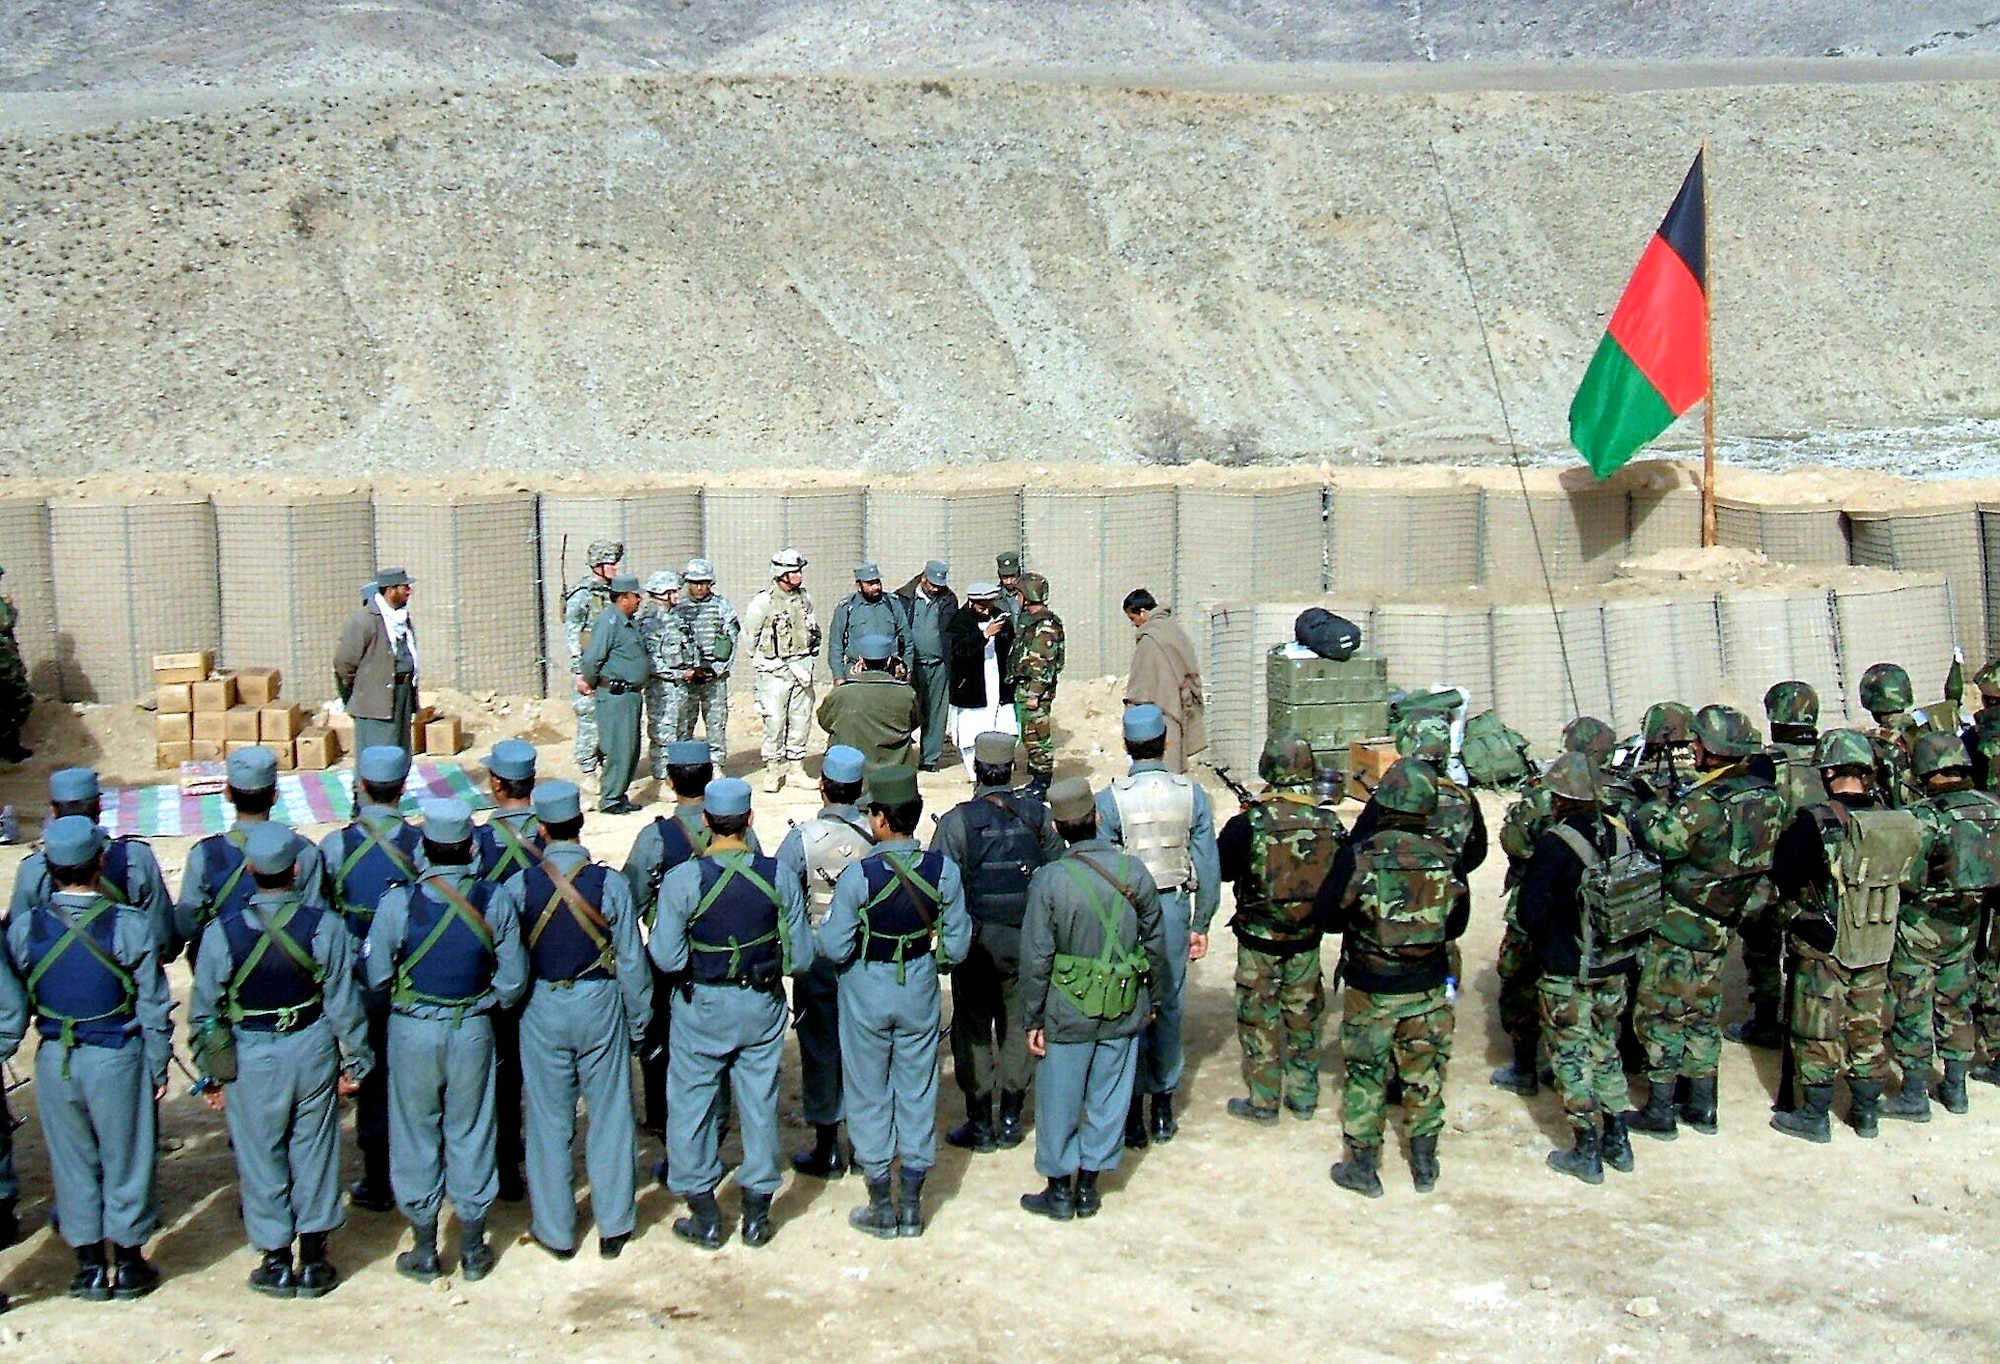 Afghan national security forces stand in formation after the flag-raising ceremony that established Security Base Najil in the Alishang Valley of Laghman Province during Operation West Hammer Dec. 12. West Hammer was aimed at defeating anti-government elements in the Alishang Valley and was carried out primarily by Task Force Chosin and the ANSF. (U.S. Army photo/Capt. Paul McCarthy)